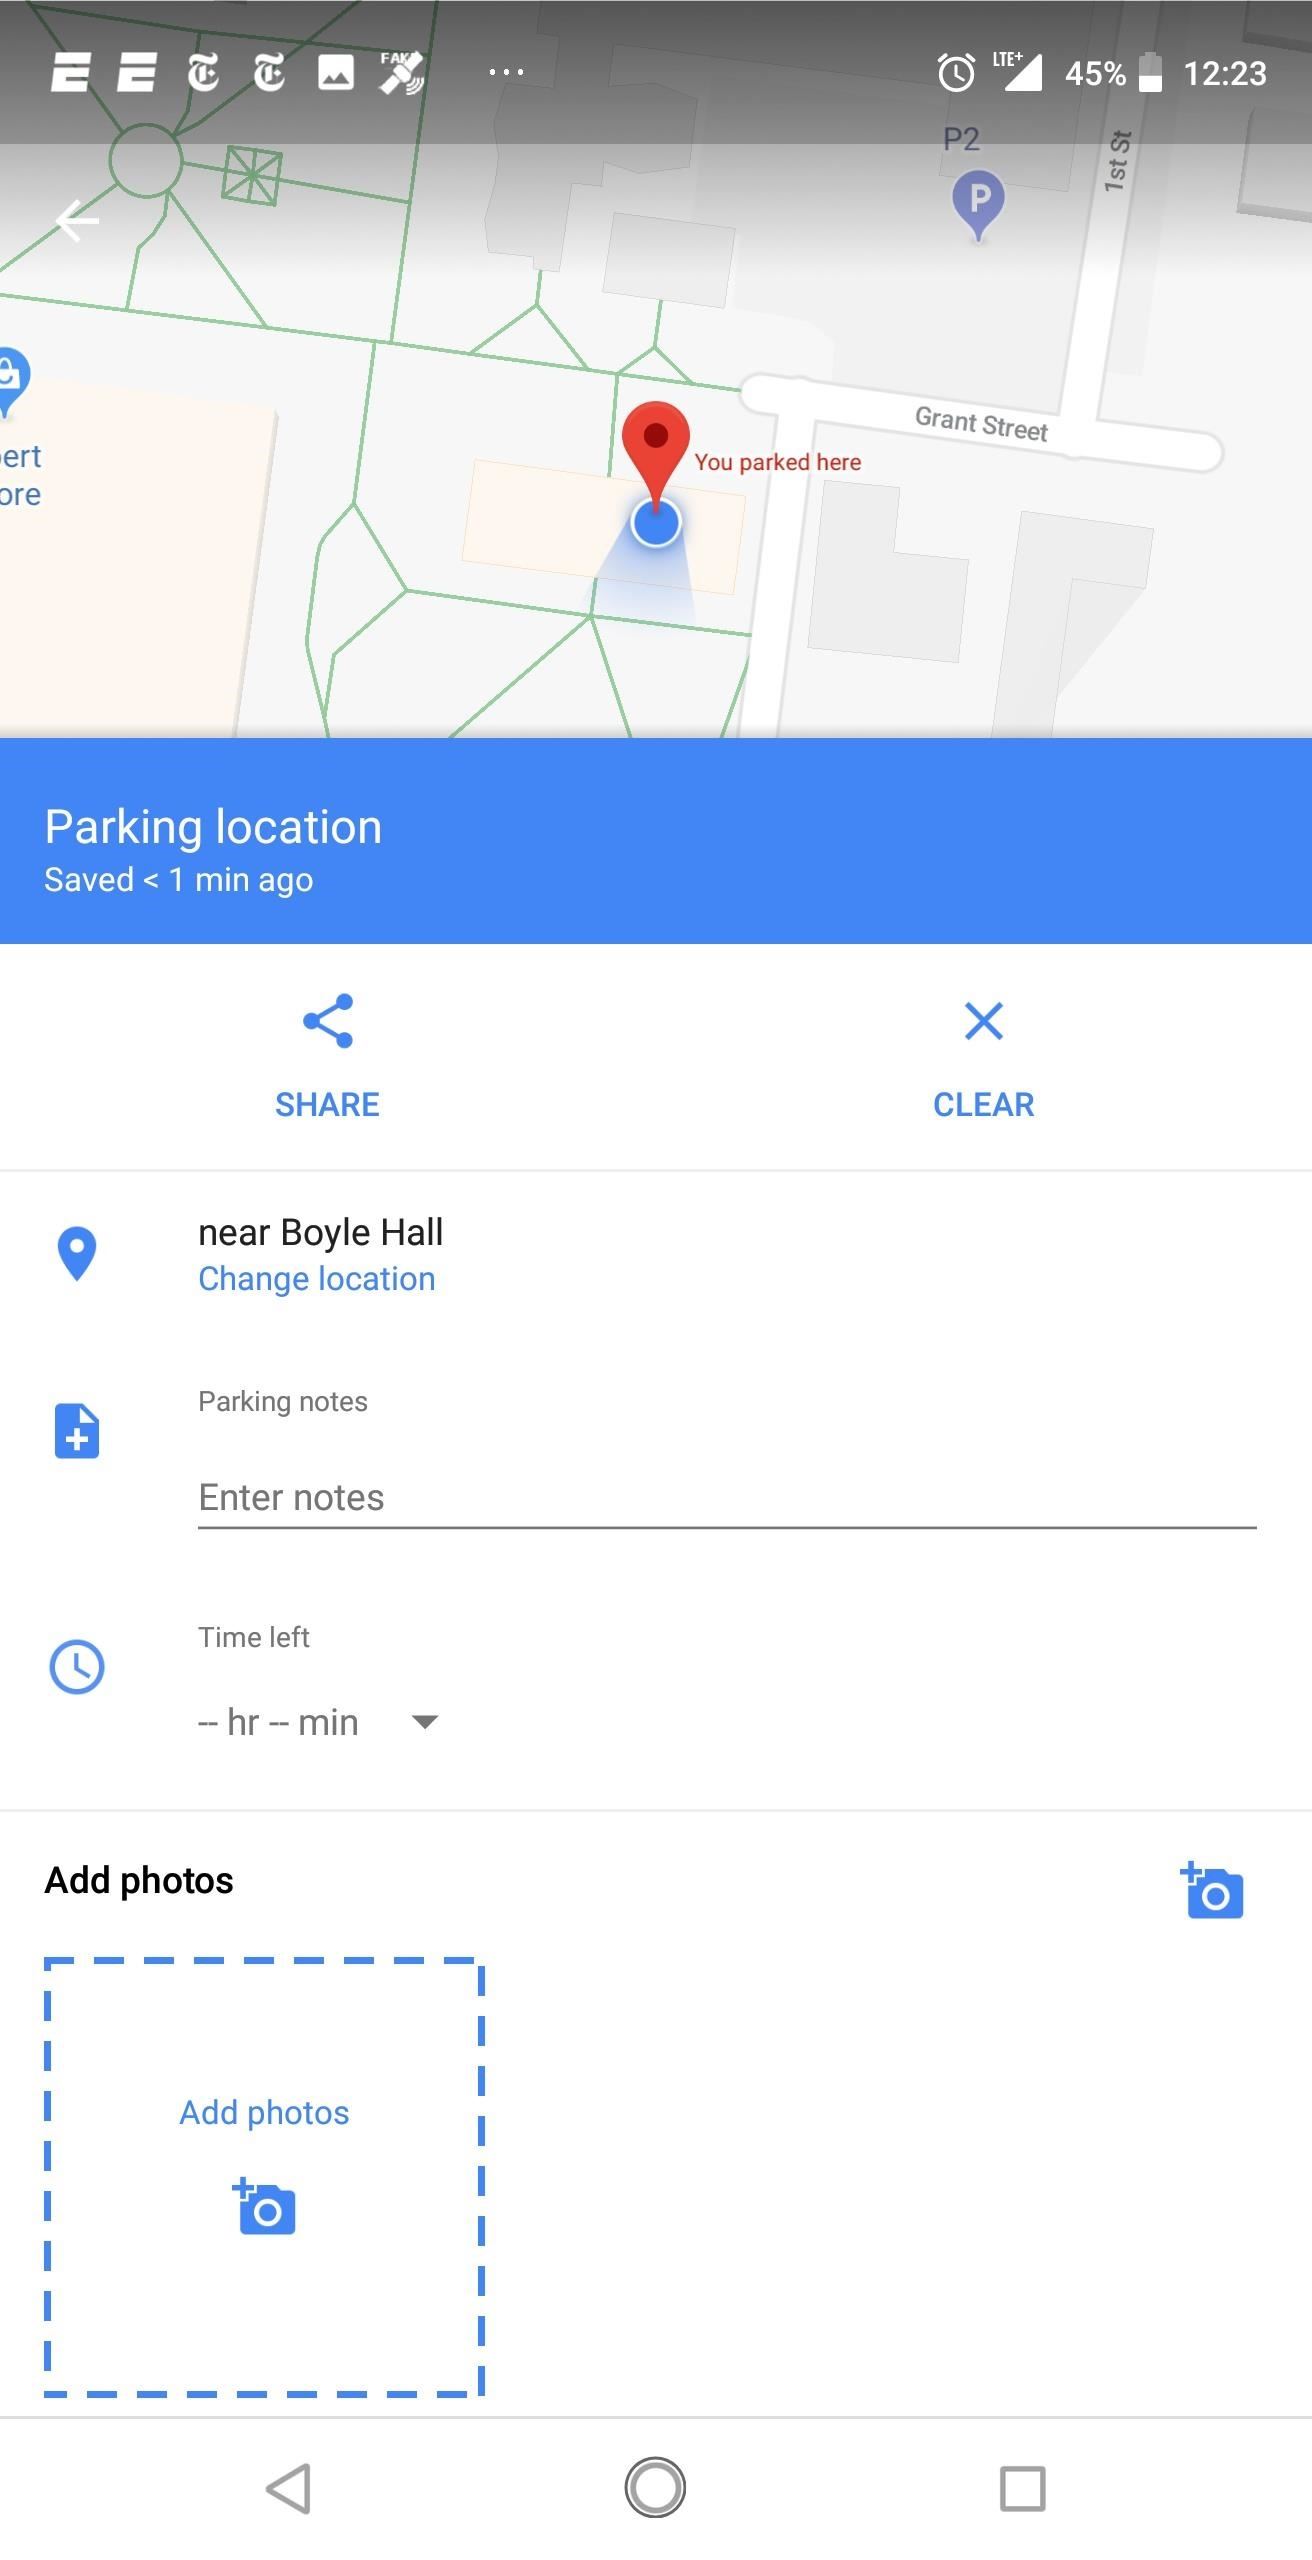 Here's What Google Maps Does with Your Data